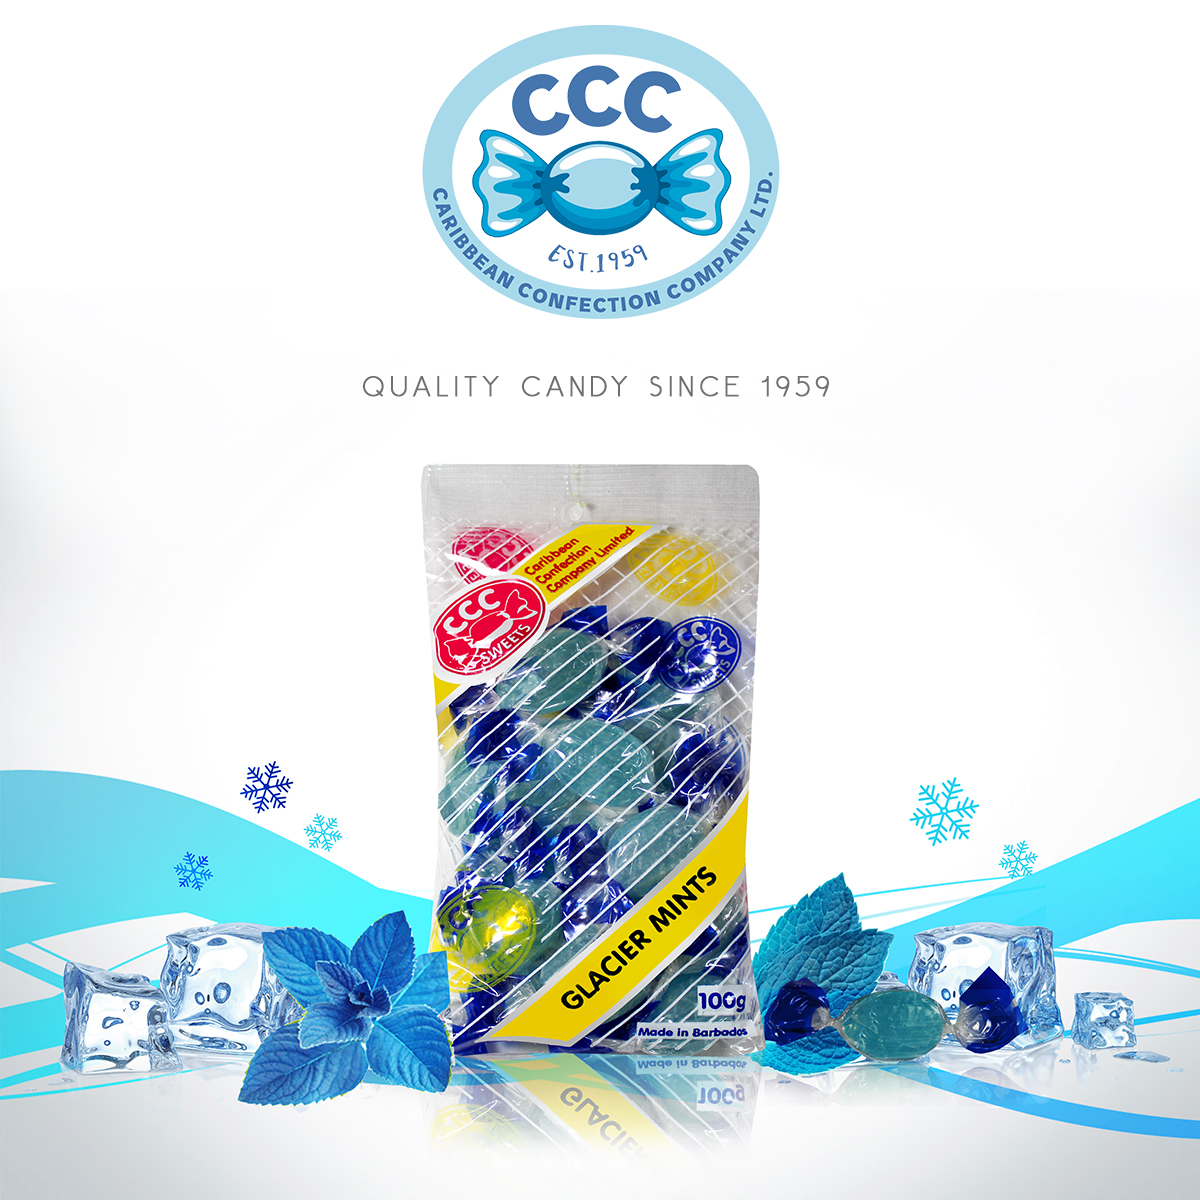 Caribbean Confection Co Ltd - Food Products & Manufacturers